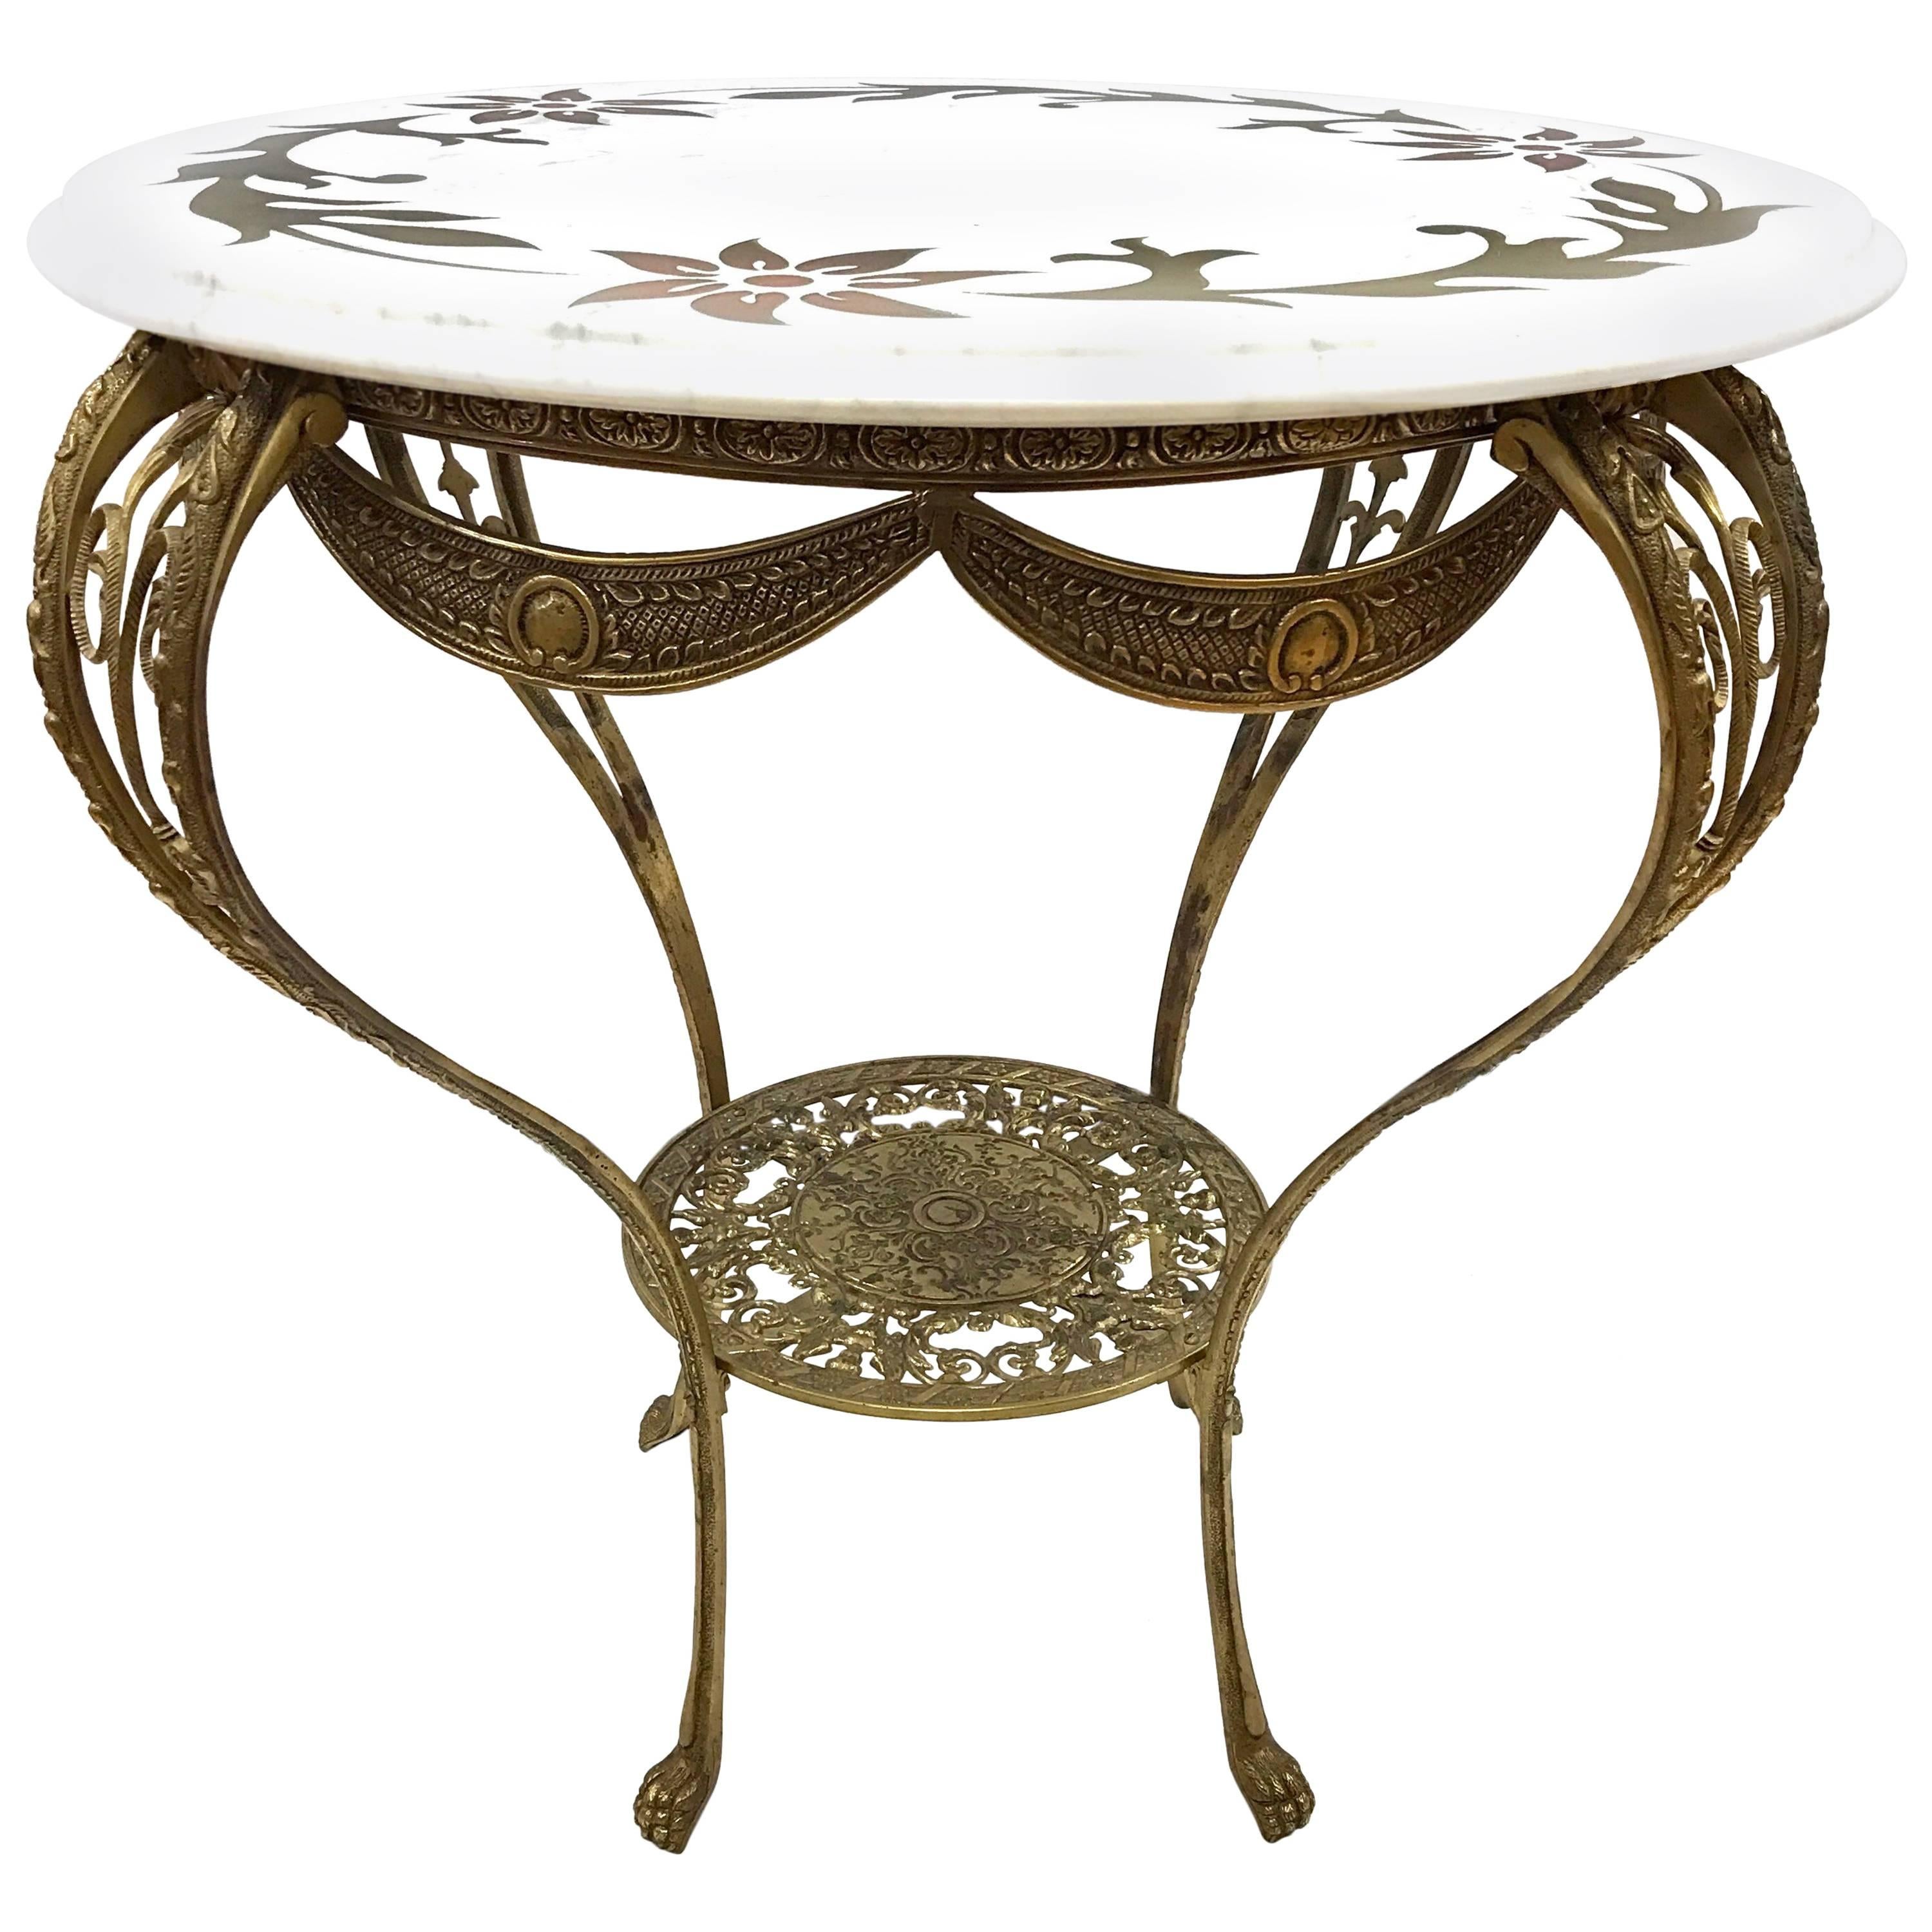 Italian Brass and Marble Round Table, Made in Italy